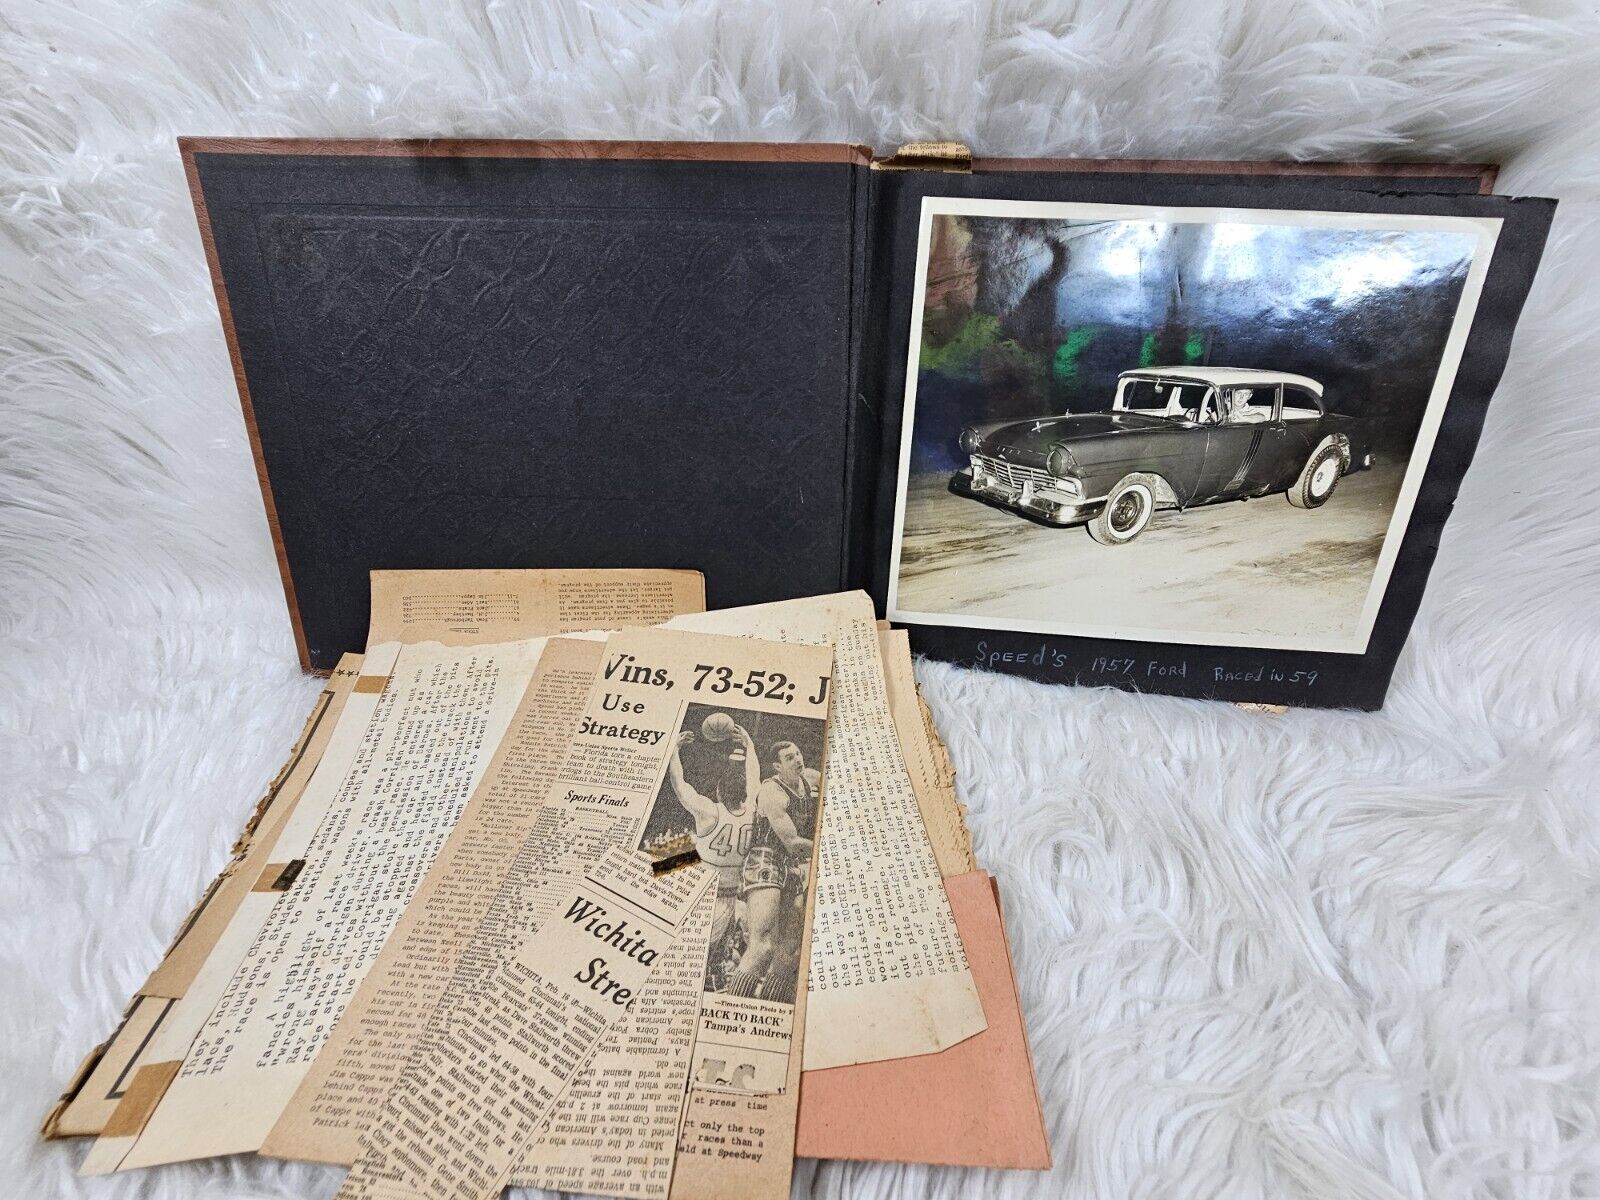 Super Cool Vintage Florida Collective Photo Book of Racing - Newspaper Clippings